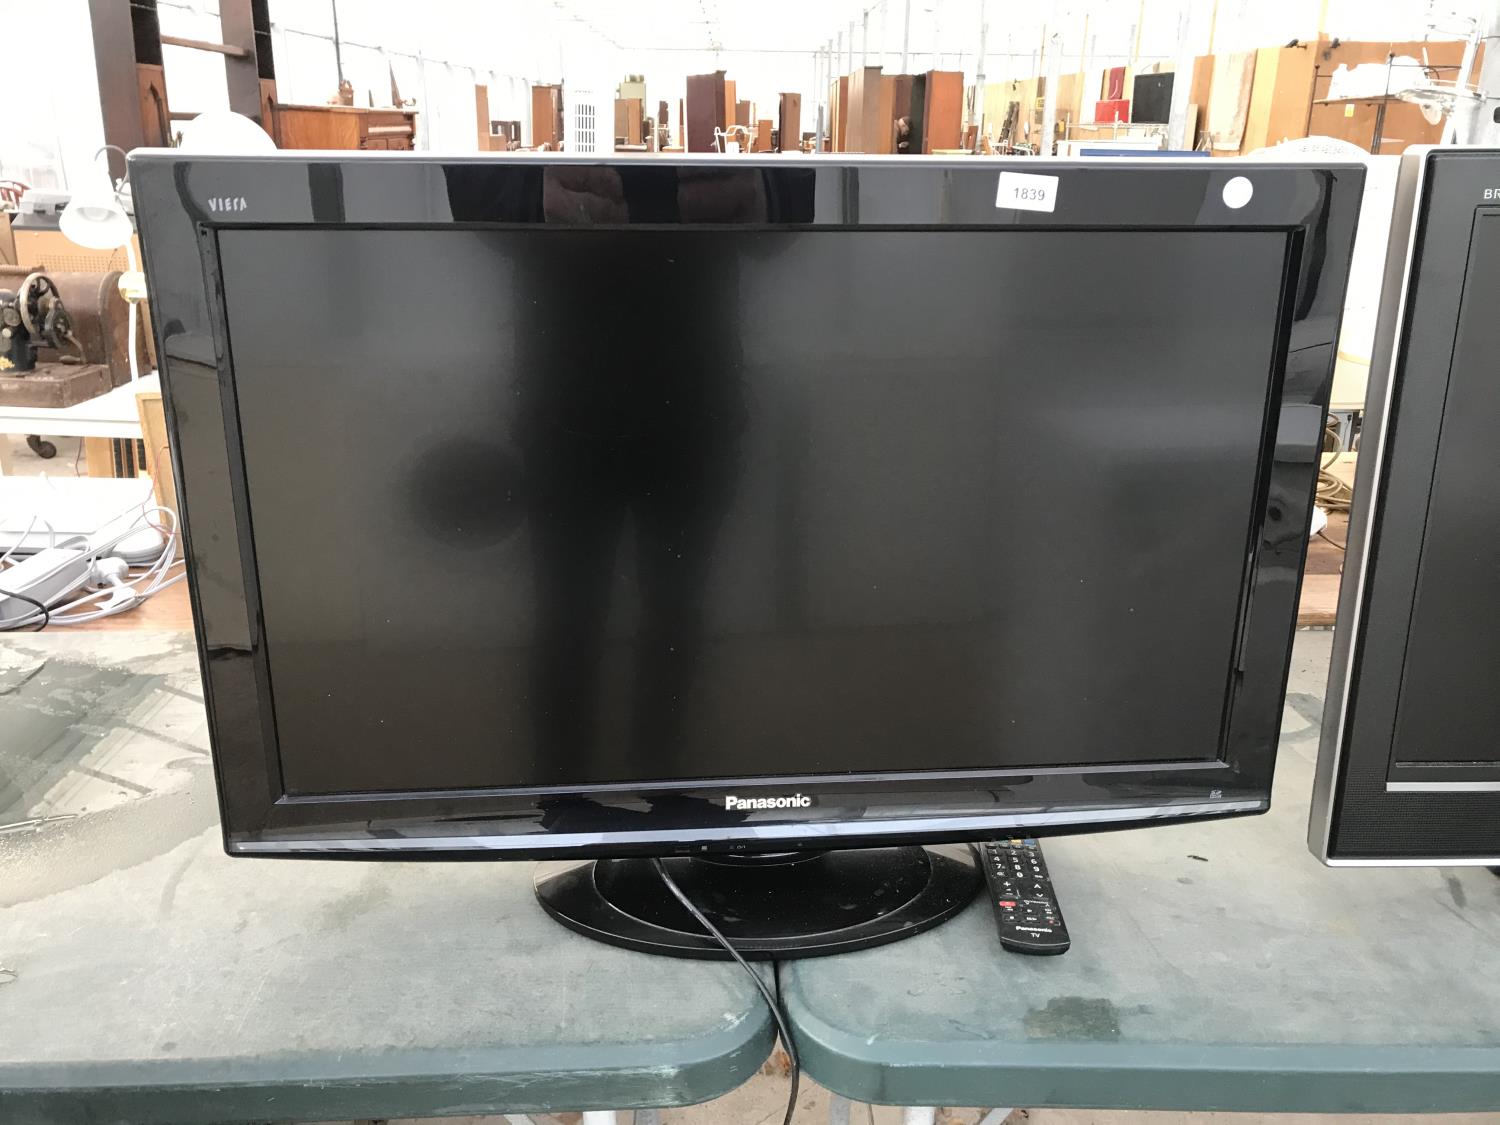 A PANASONIC 32" TELEVISION WITH REMOTE BELIEVED IN WORKING ORDER BUT NO WARRANTY